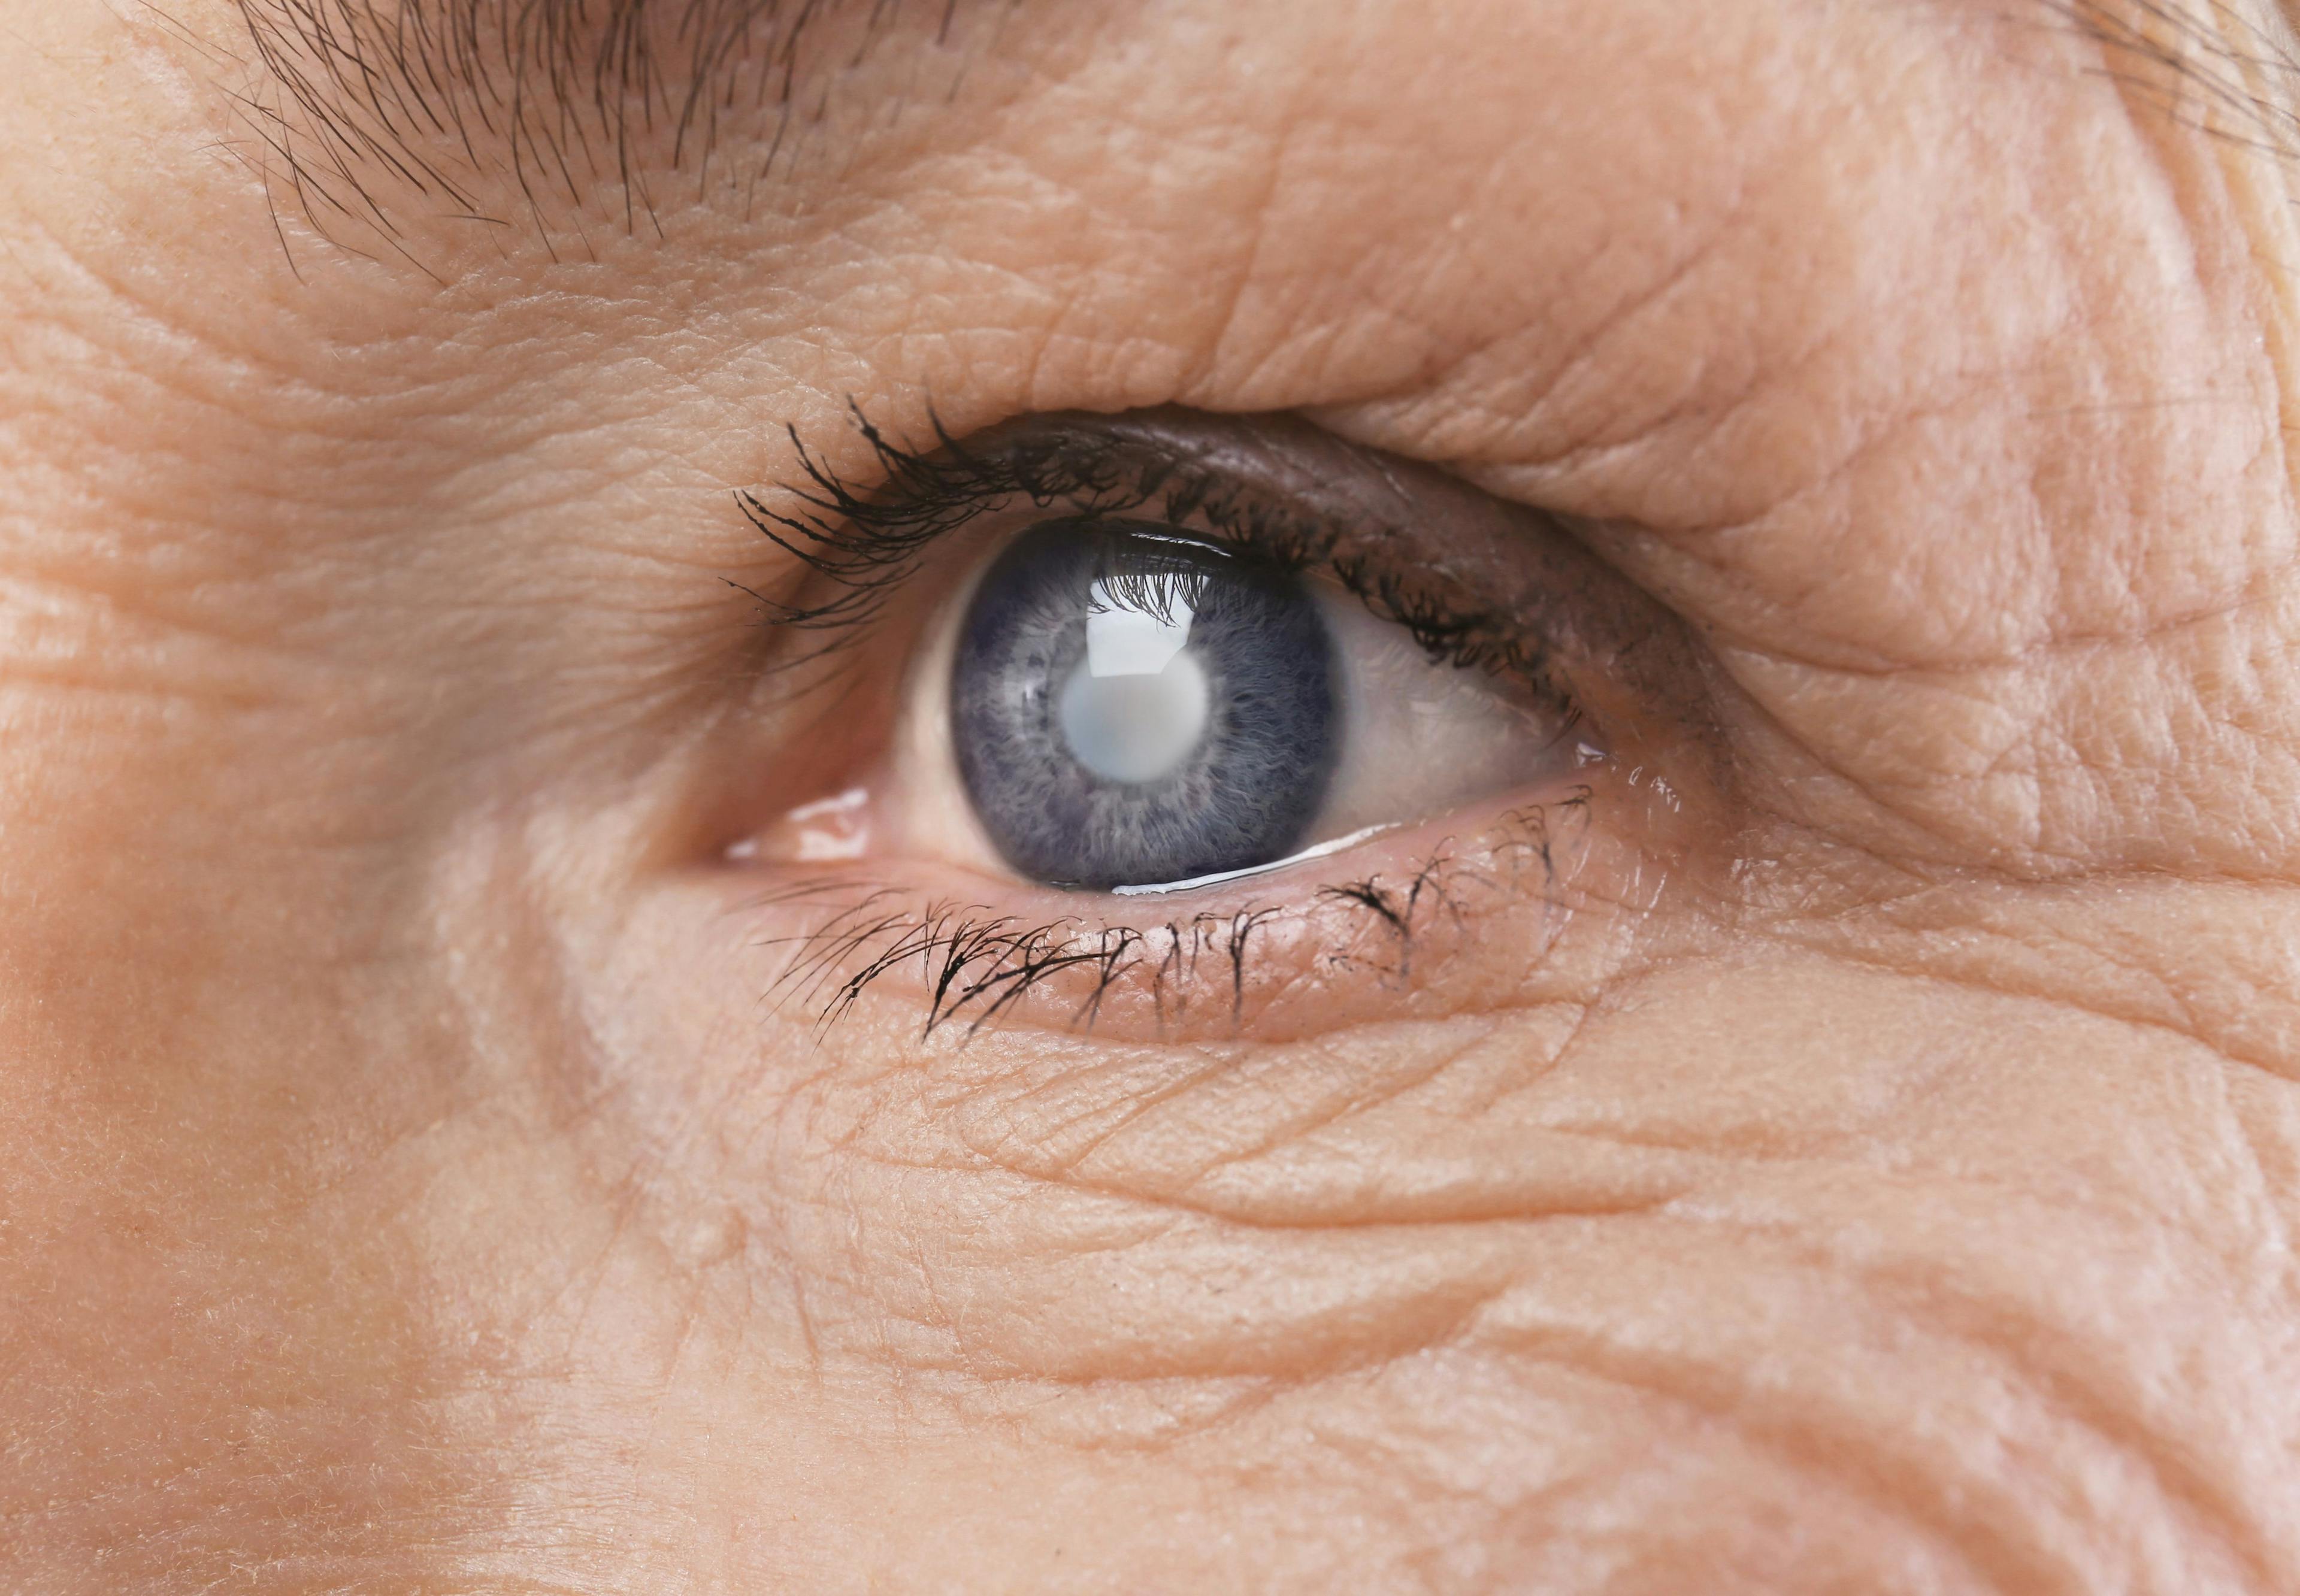 Older woman with Glaucoma | Image credit: Africa Studio - stock.adobe.com